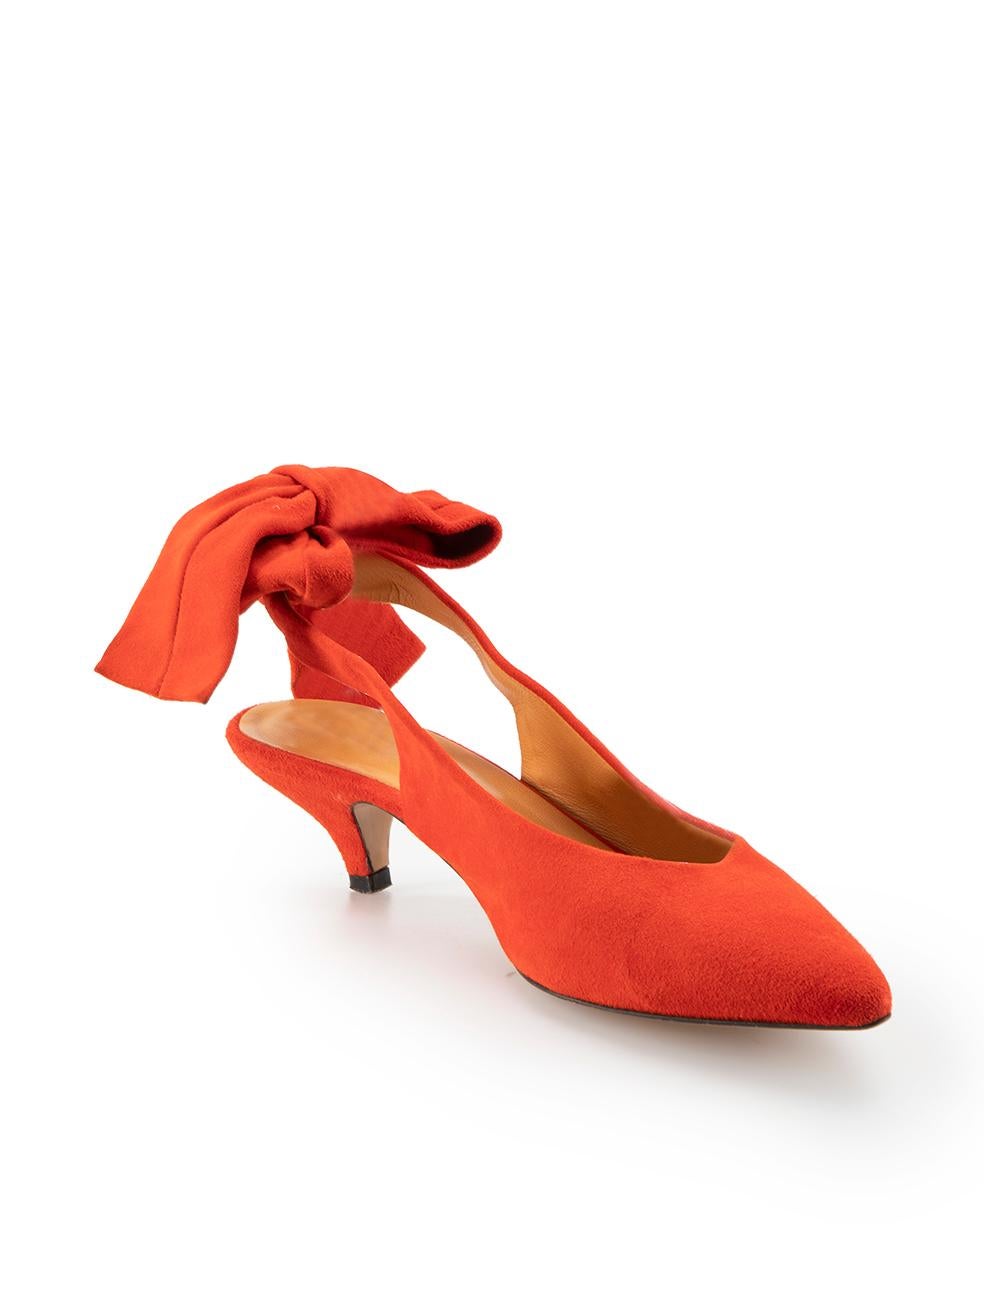 CONDITION is Very good. Minimal wear to heels is evident. Minimal wear to upper with negligible markings at toe and heel, moderate scuffing to sole also present on this used Ganni designer resale item.



Details


Reddish